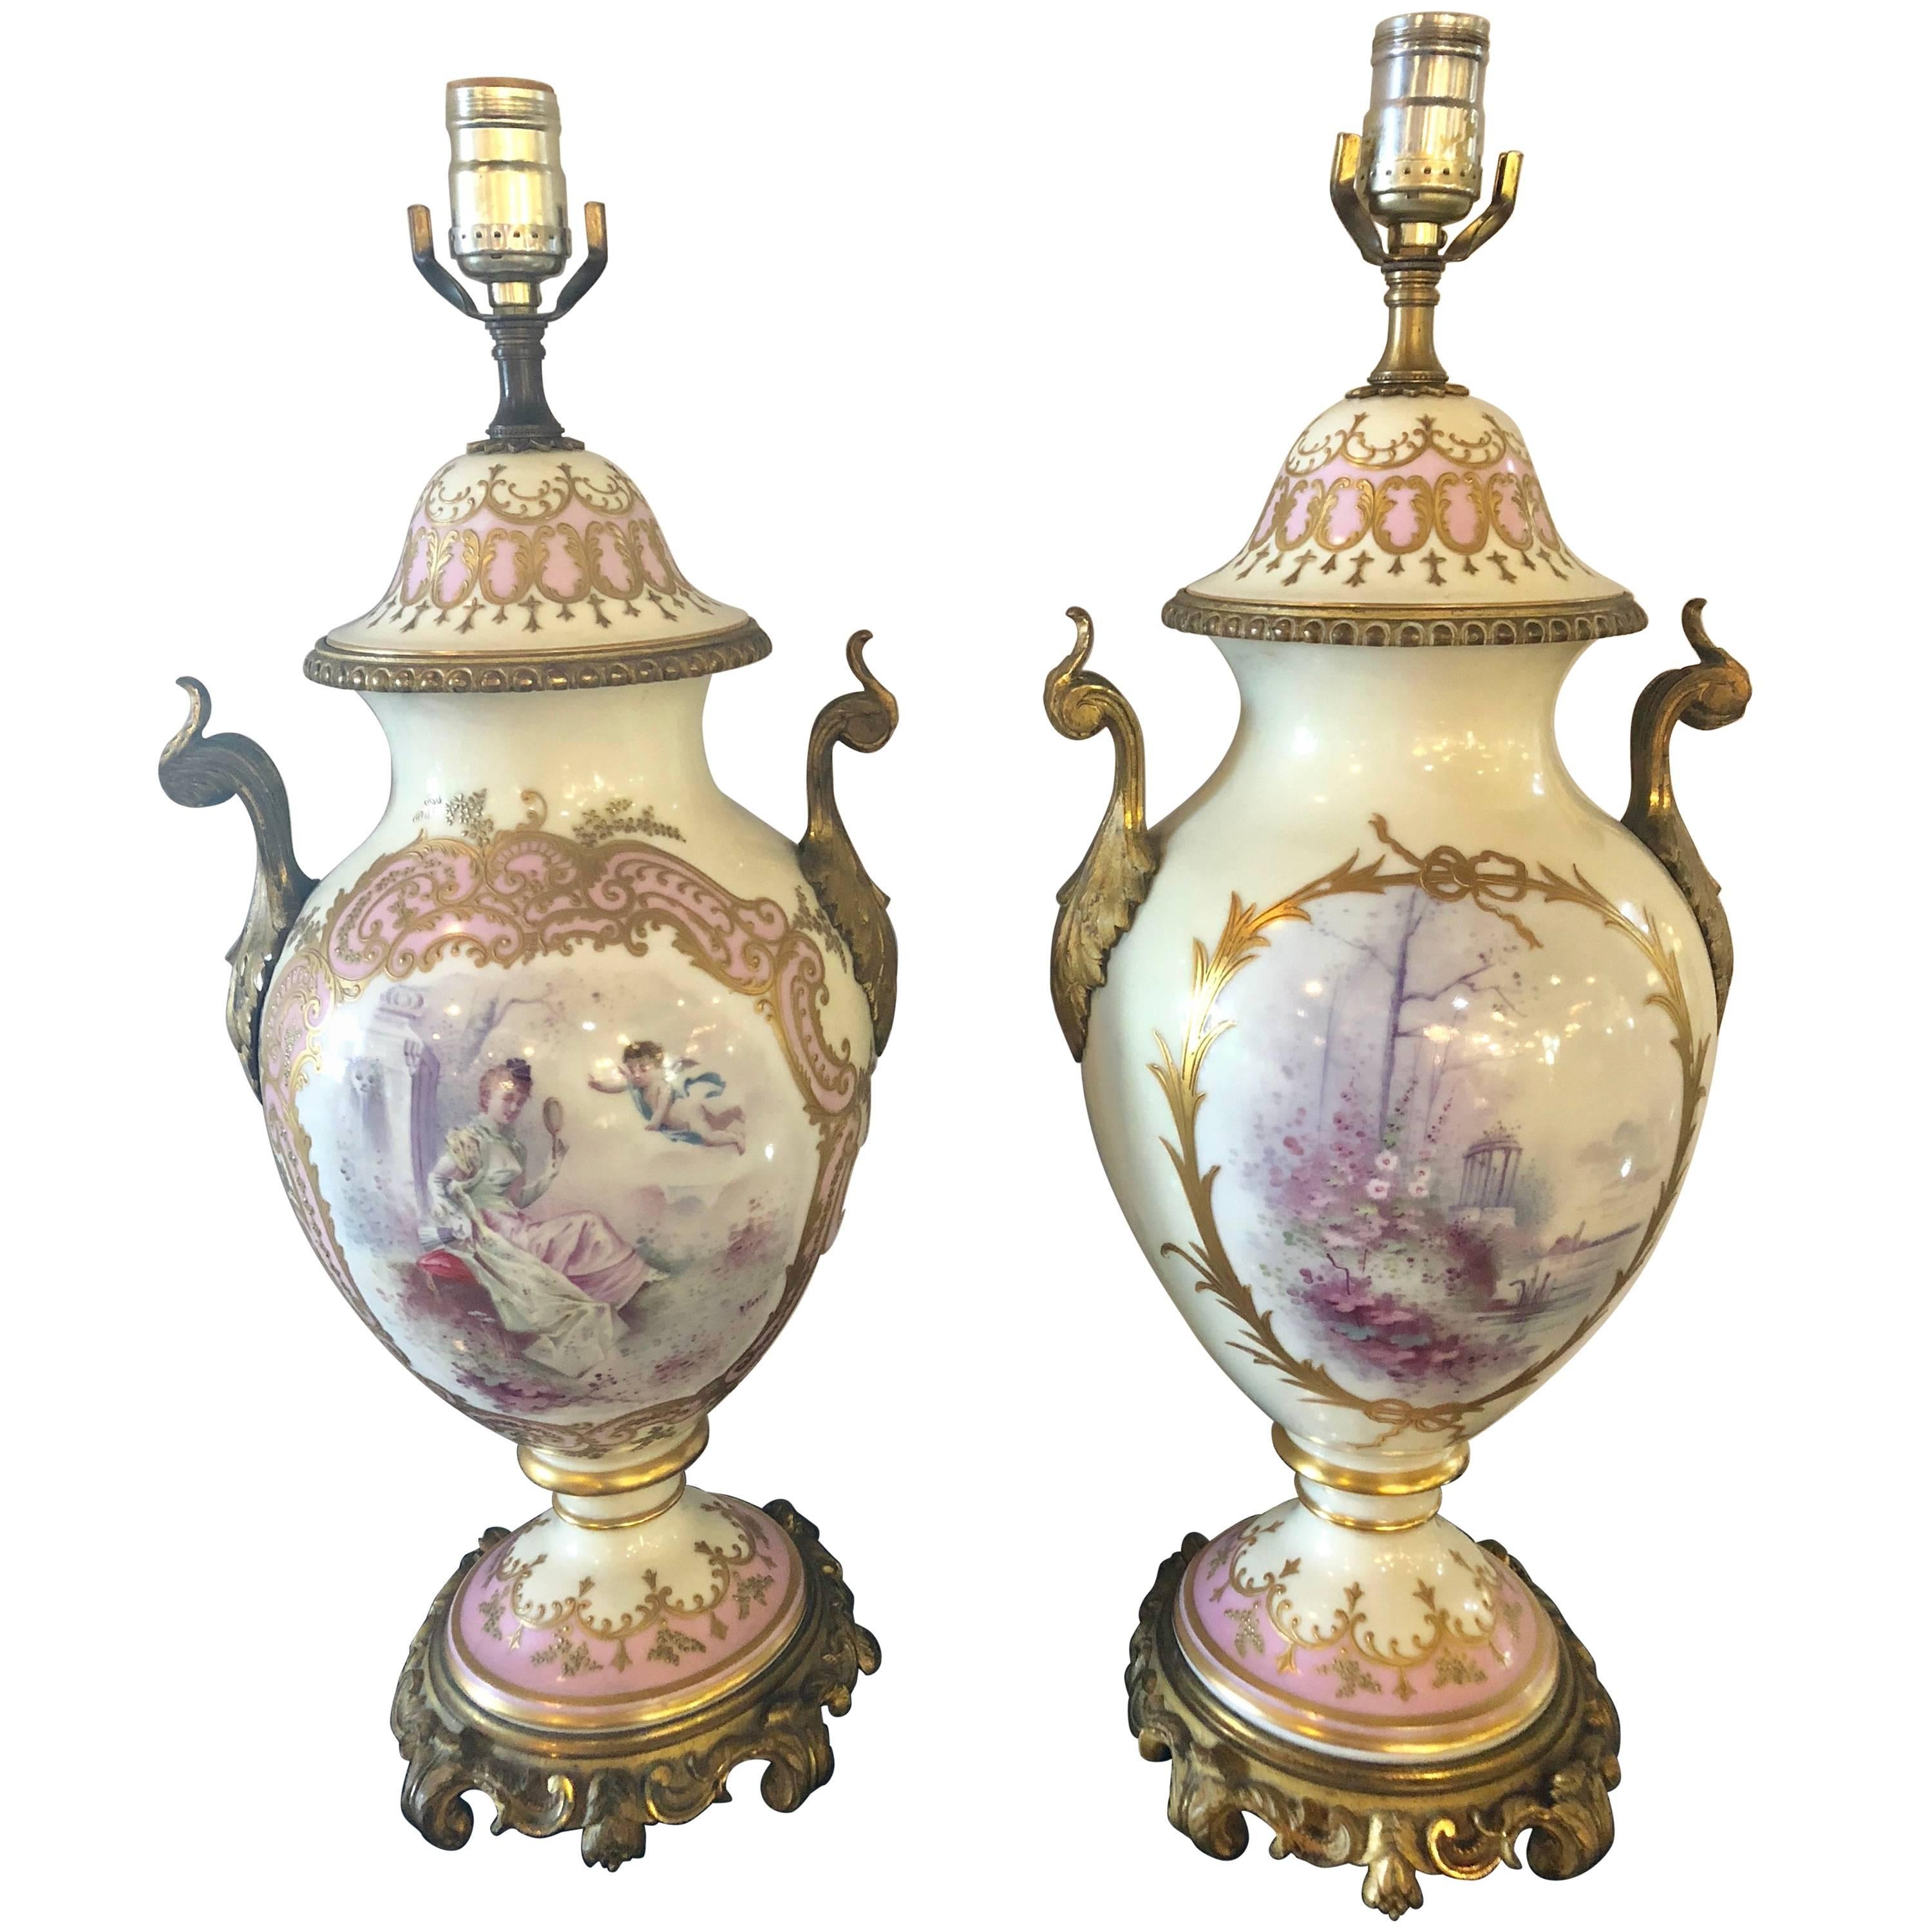 Pair of Bronze Mounted French Porcelain Serves Urns Converted into Table Lamps 